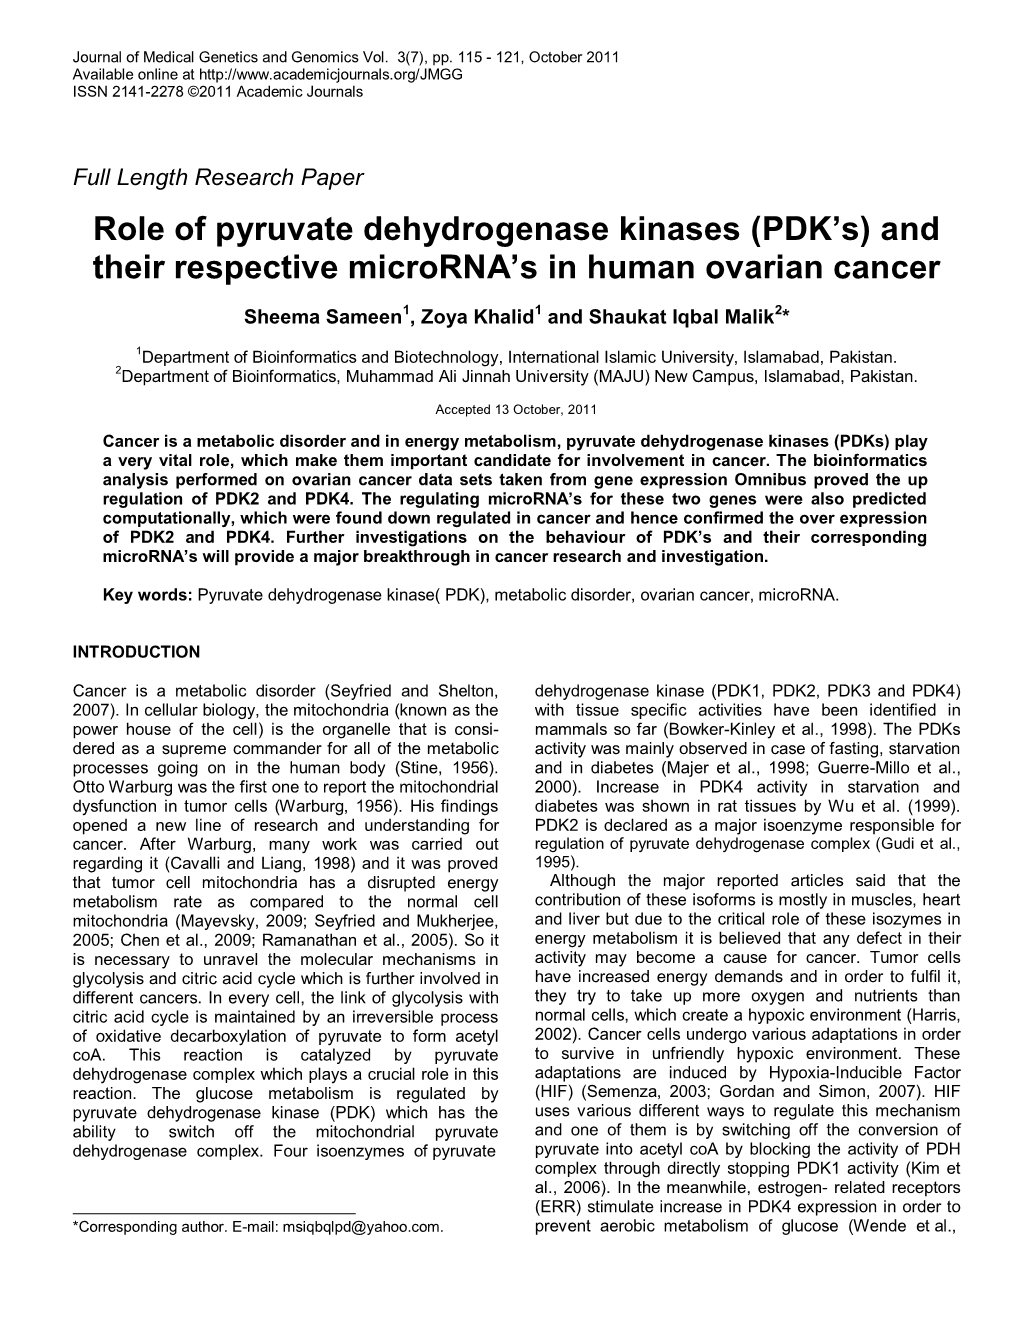 Role of Pyruvate Dehydrogenase Kinases (PDK's) and Their